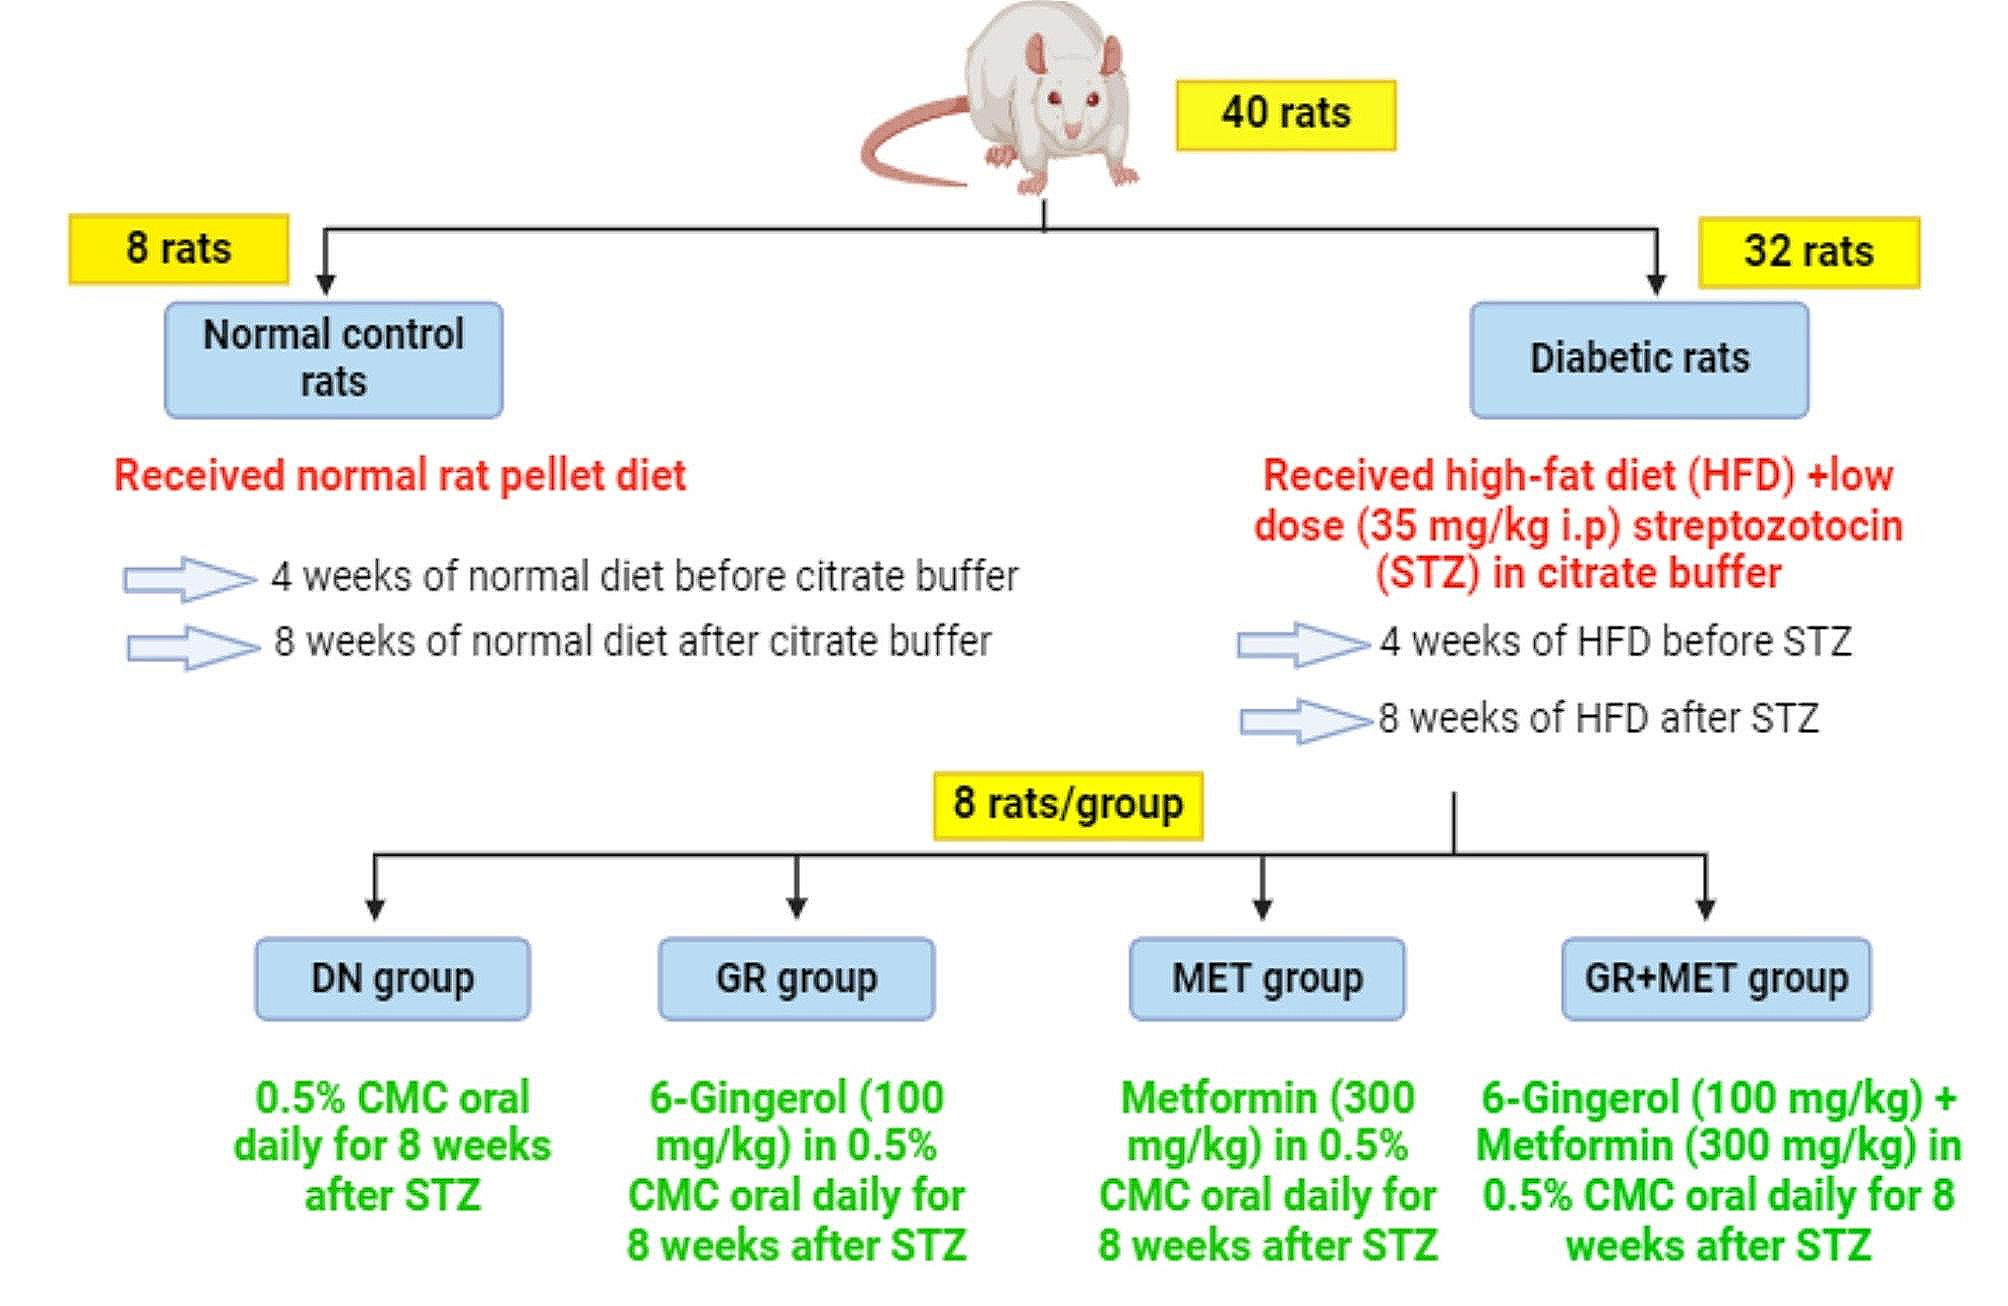 Renoprotective effect of a novel combination of 6-gingerol and metformin in high-fat diet/streptozotocin-induced diabetic nephropathy in rats via targeting miRNA-146a, miRNA-223, TLR4/TRAF6/NLRP3 inflammasome pathway and HIF-1α